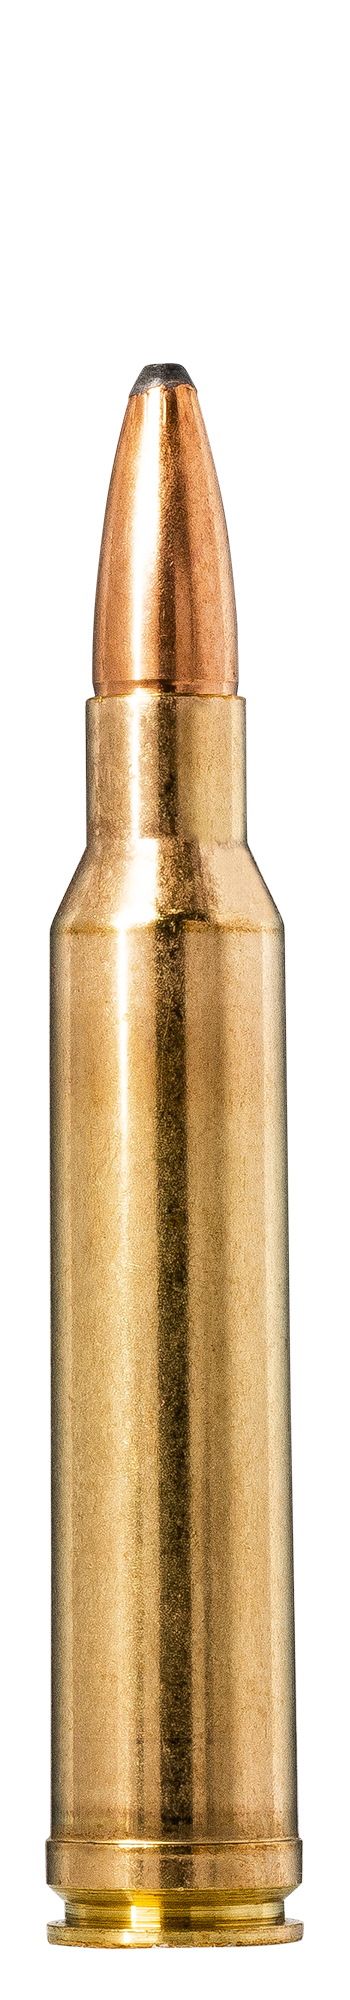 308 Norma Magnum Dummy Rounds Snap Caps Fake Ammo Bullets .308 Mag - Rifle  Ammunition at  : 1004079614